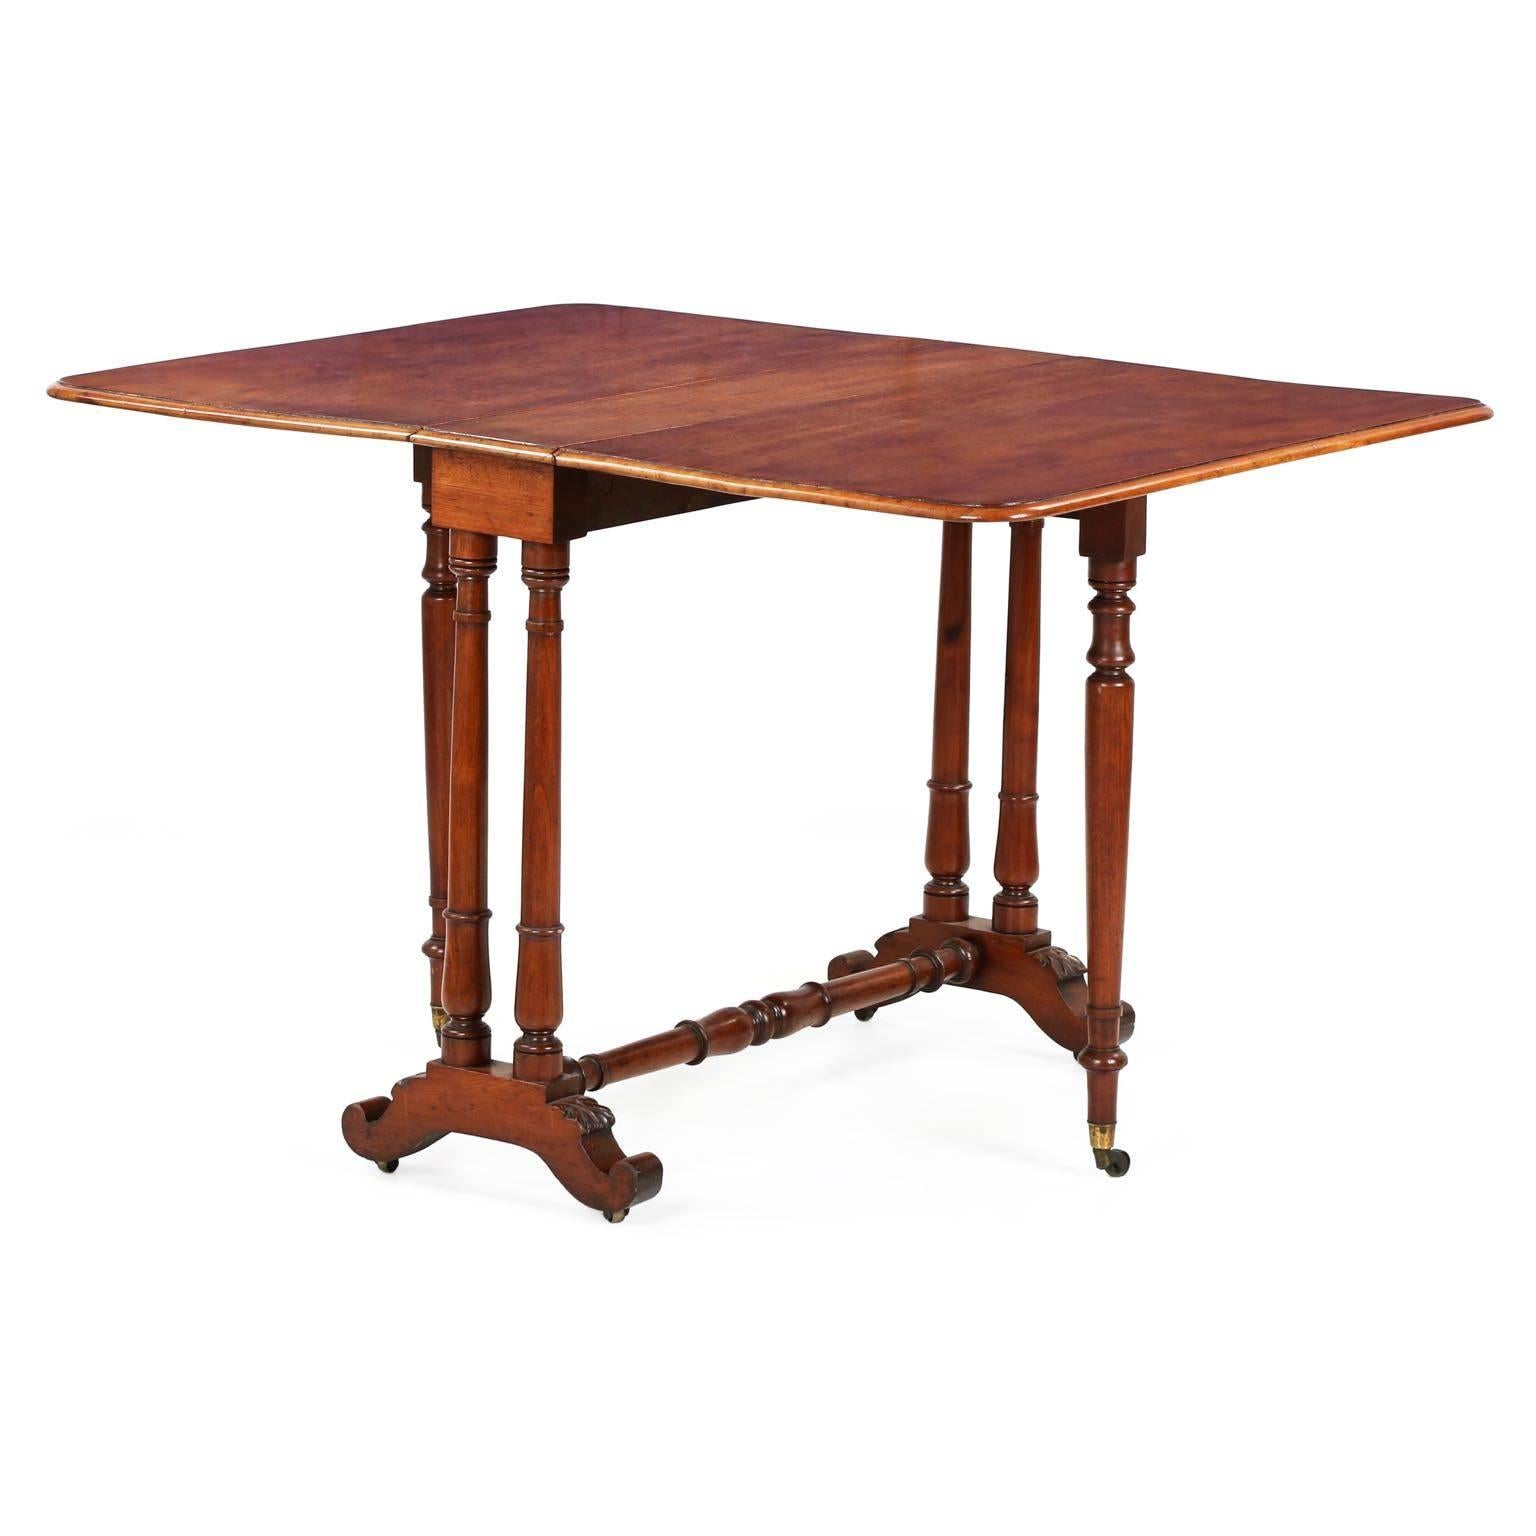 This beautiful drop leaf table is a form unique to the late Regency period in England known as a “Sunderland” table. Particularly petite in footprint, the table reduces to being only 14” in depth when folded along a wall, the gorgeous large planks